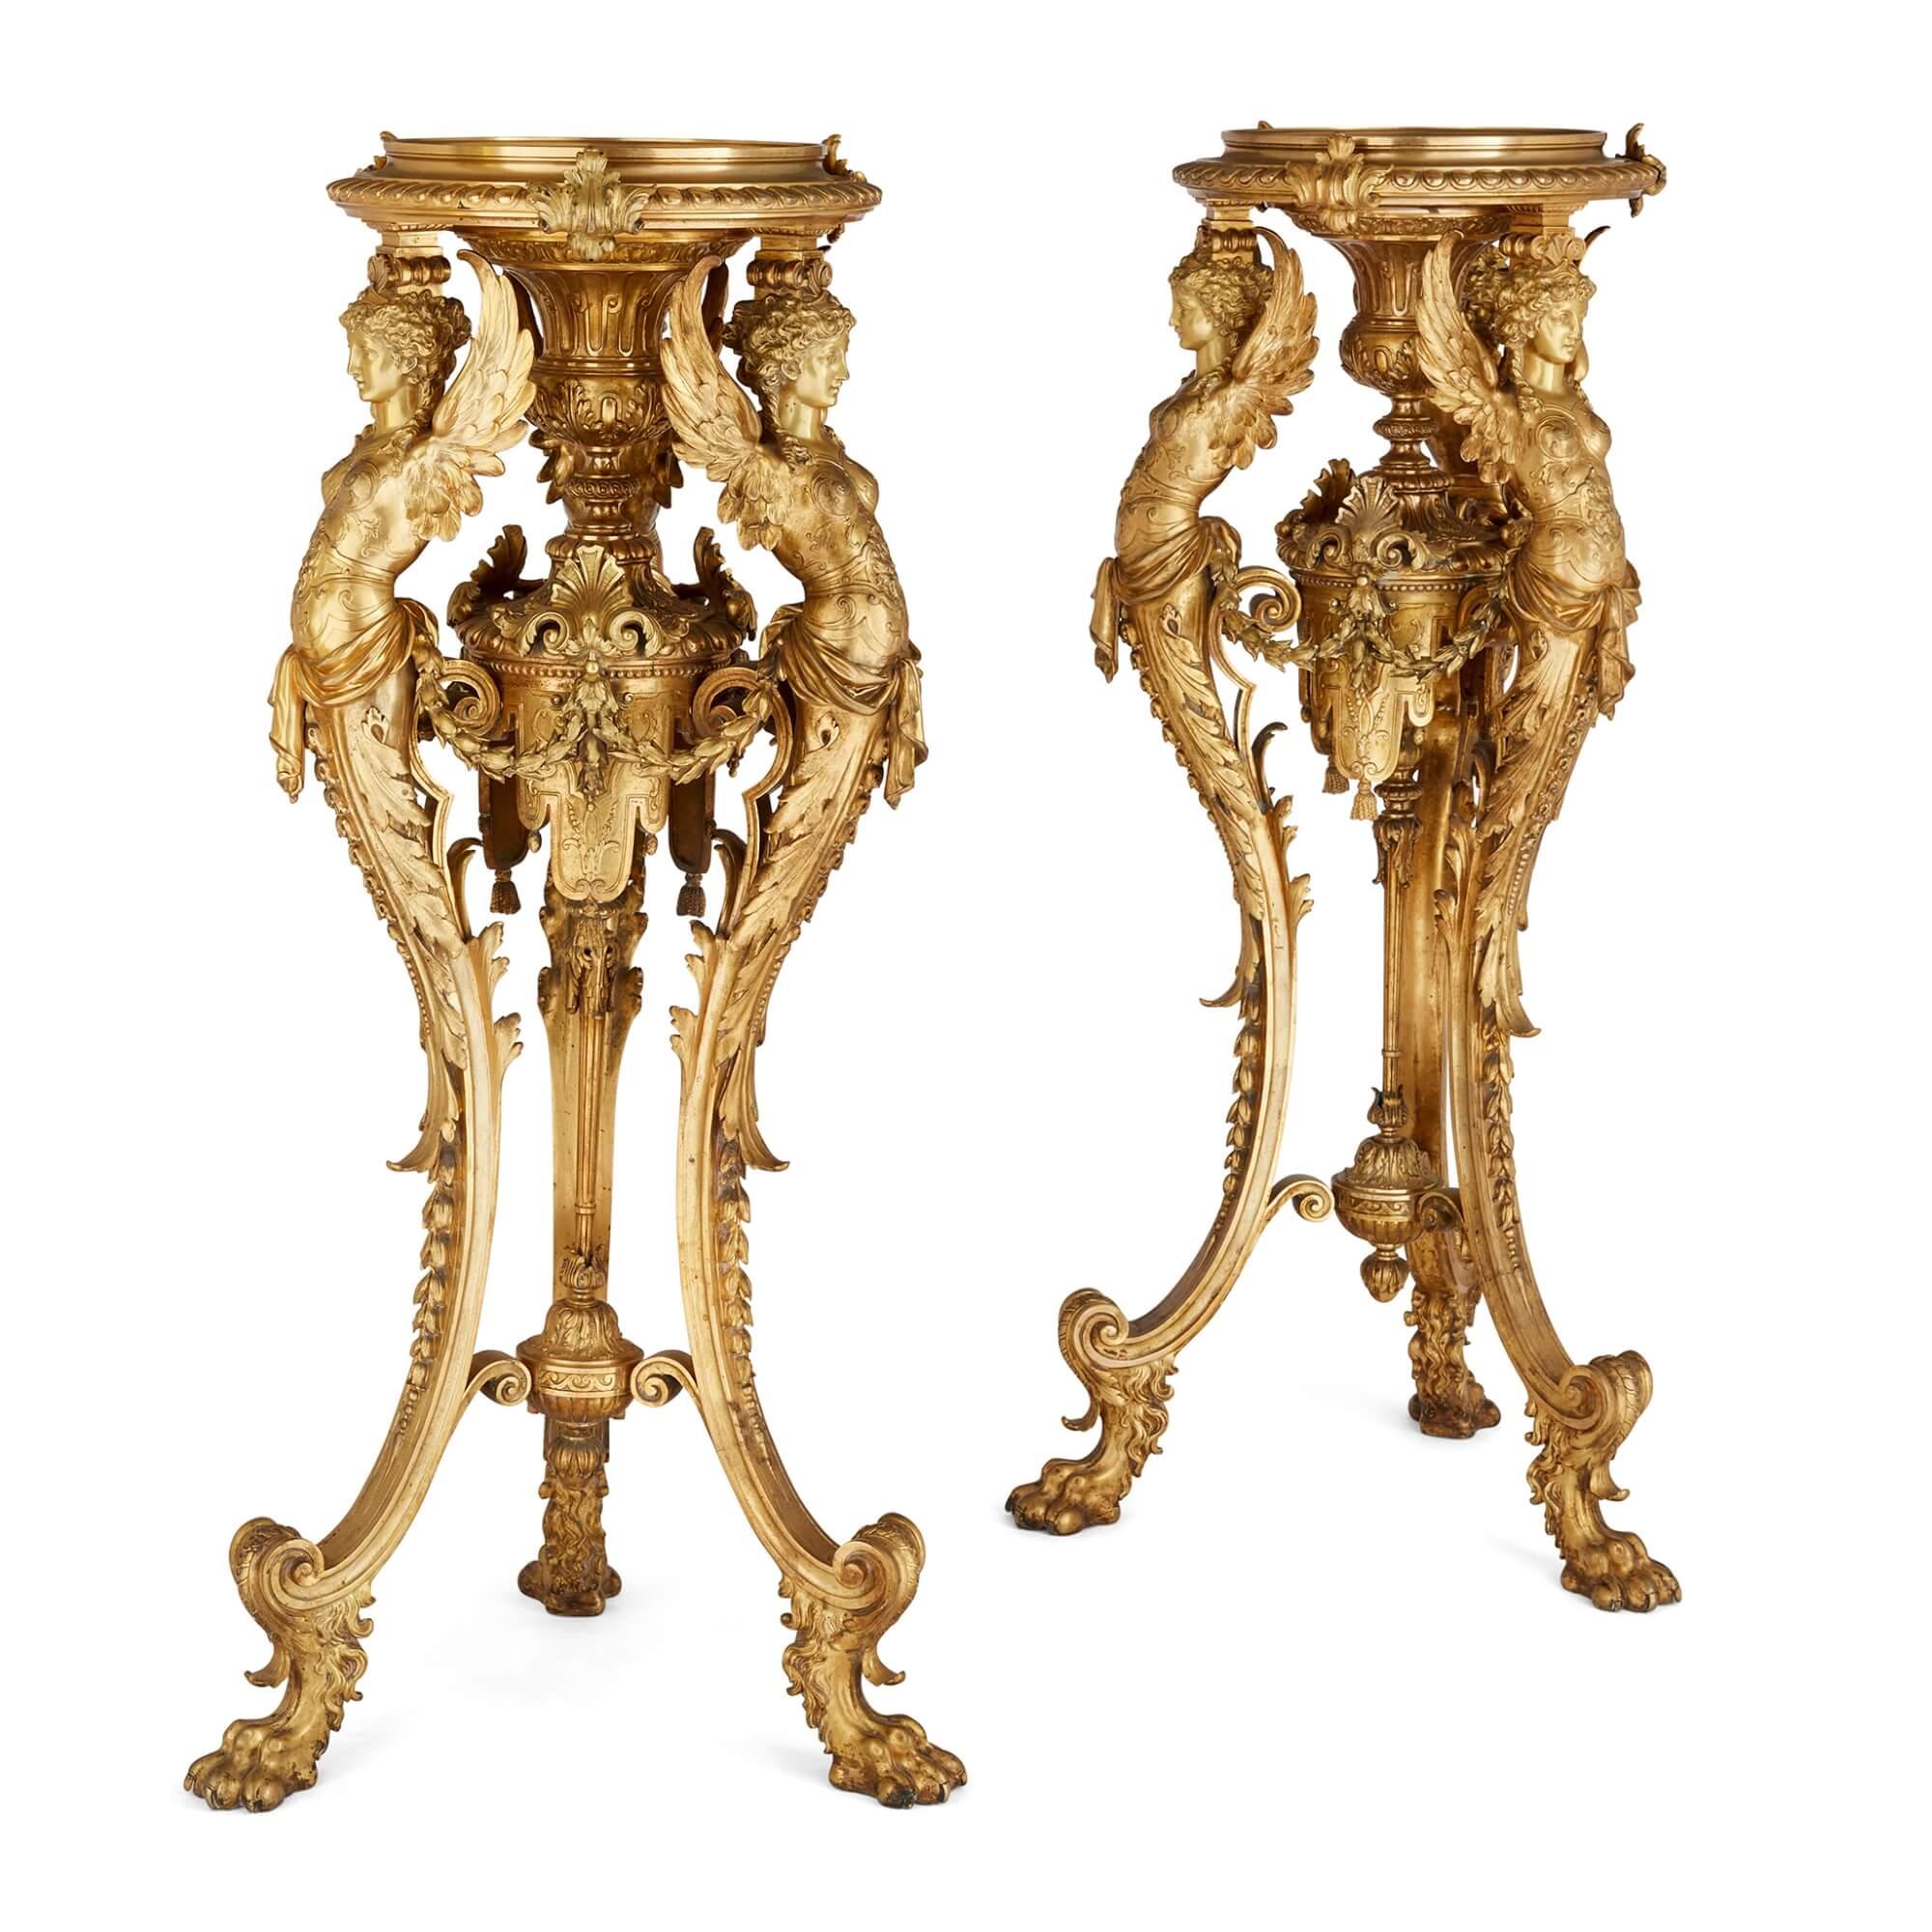 Antique pair of ormolu pedestals with Neo-Grec sphinx supports
French, Late 19th Century
Height 105cm, width 49cm, depth 49cm

Decorated with Neo-Grec and Rococo style elements, this stunning pair of pedestals are impressively crafted from